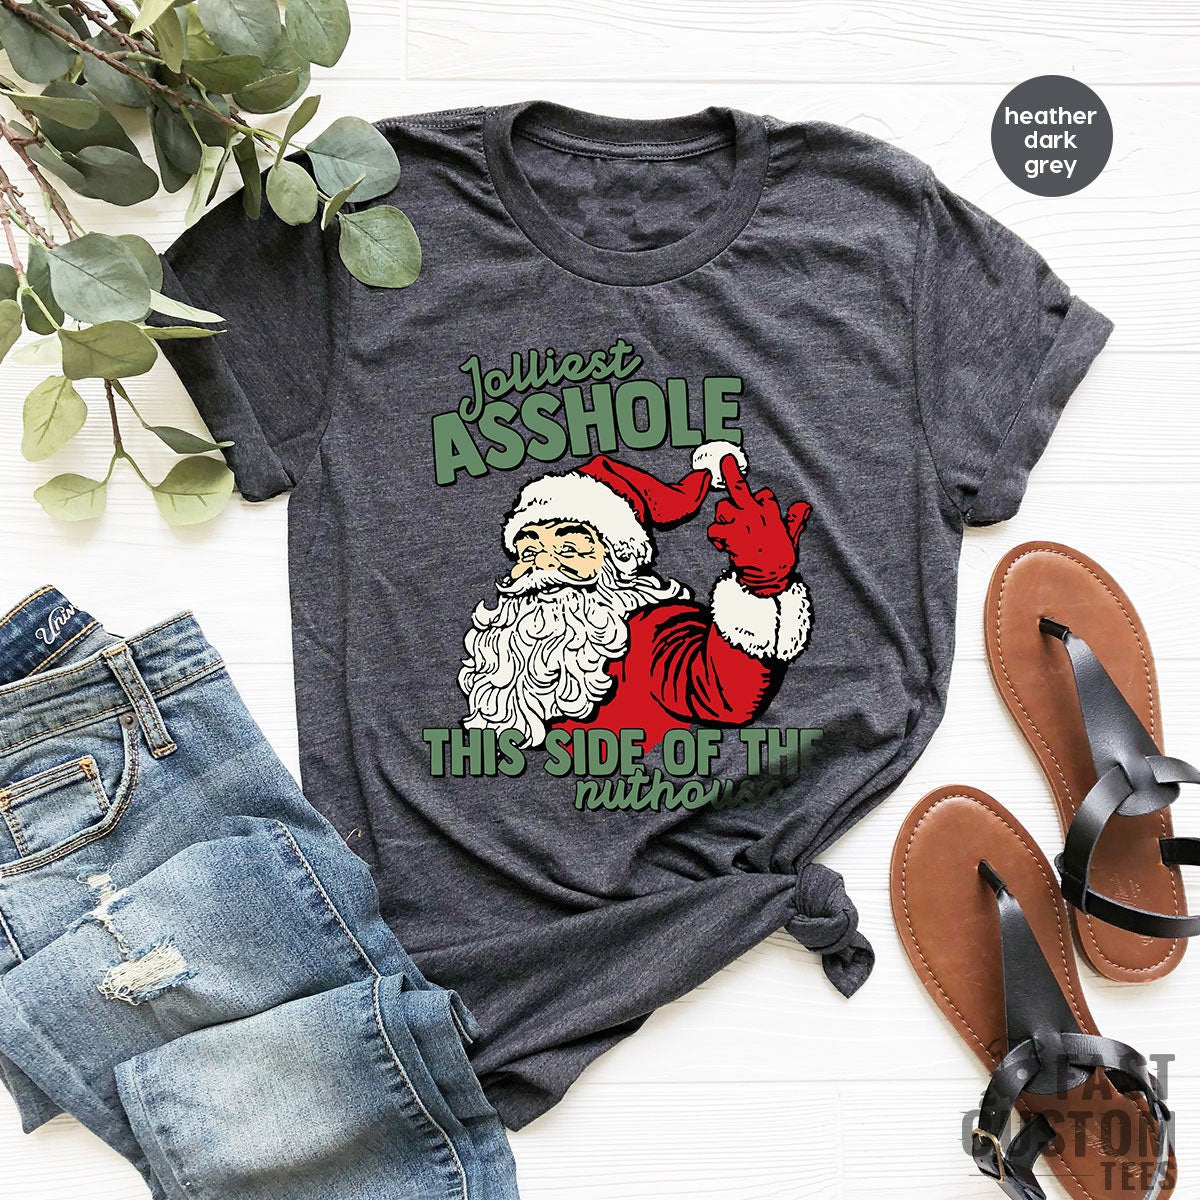 Jolliest Bunch of Assholes Shirt This Side of The Nuthouse Shirt, Christmas Family T-shirt, Funny Christmas, Christmas Tee, Christmas 2022 - Fastdeliverytees.com